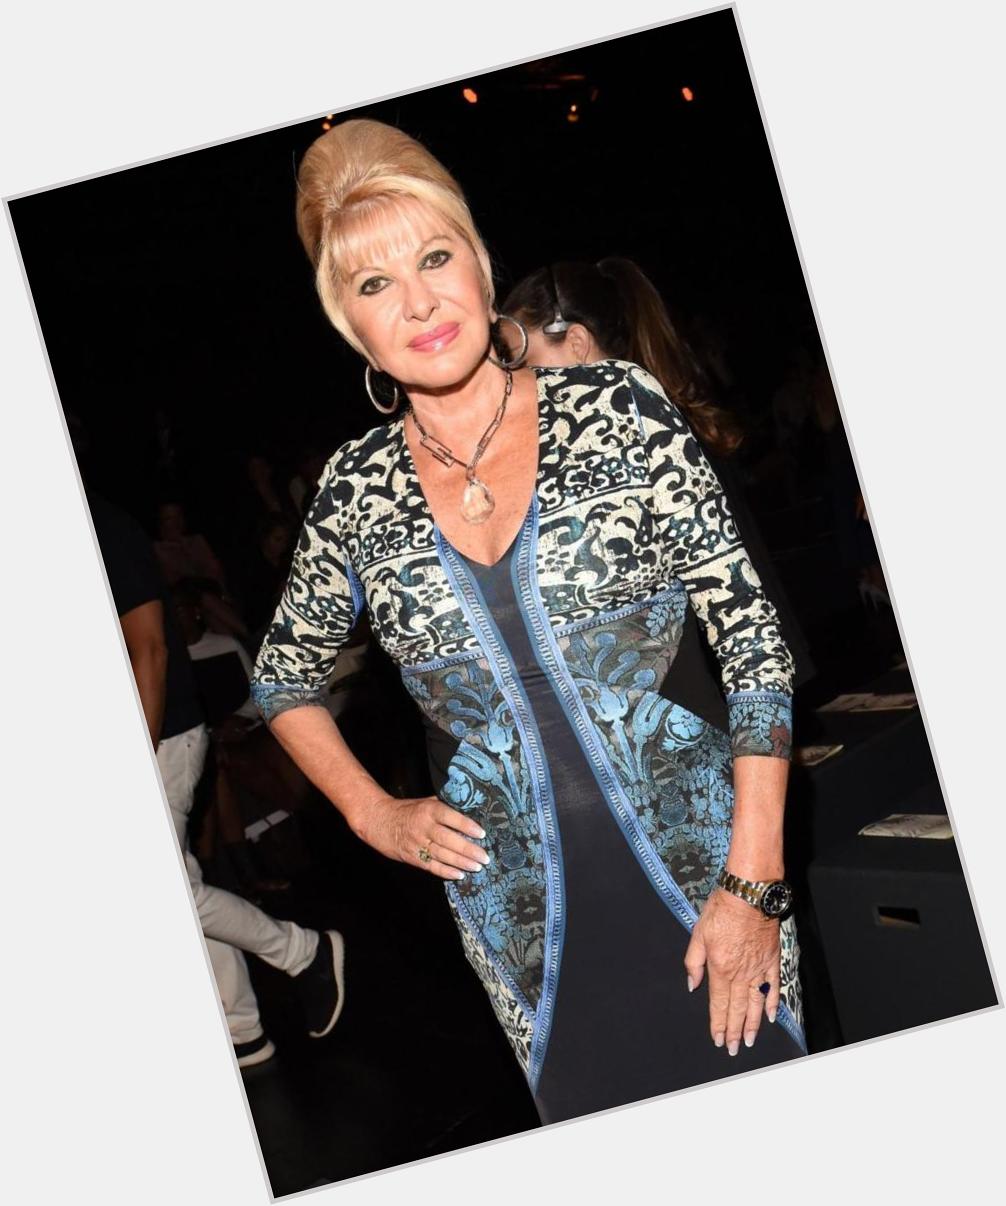 Happy Birthday Ivana Trump! She\s the ex-wife of Donald Trump (greatX18 grandson of Edward I)! She turnt 68 today! 